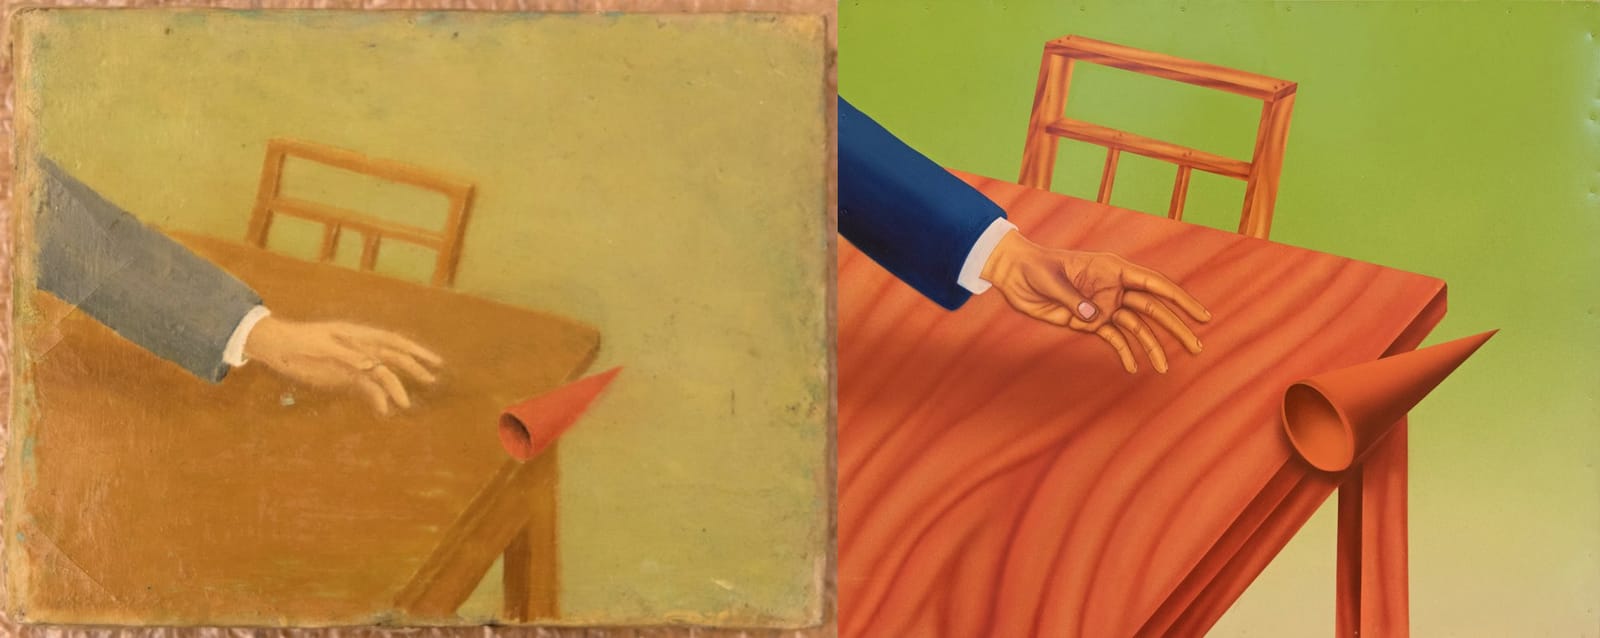 Two paintings side by side depicting a chair, a table with a cone falling off it, and a hand reaching towards the cone.